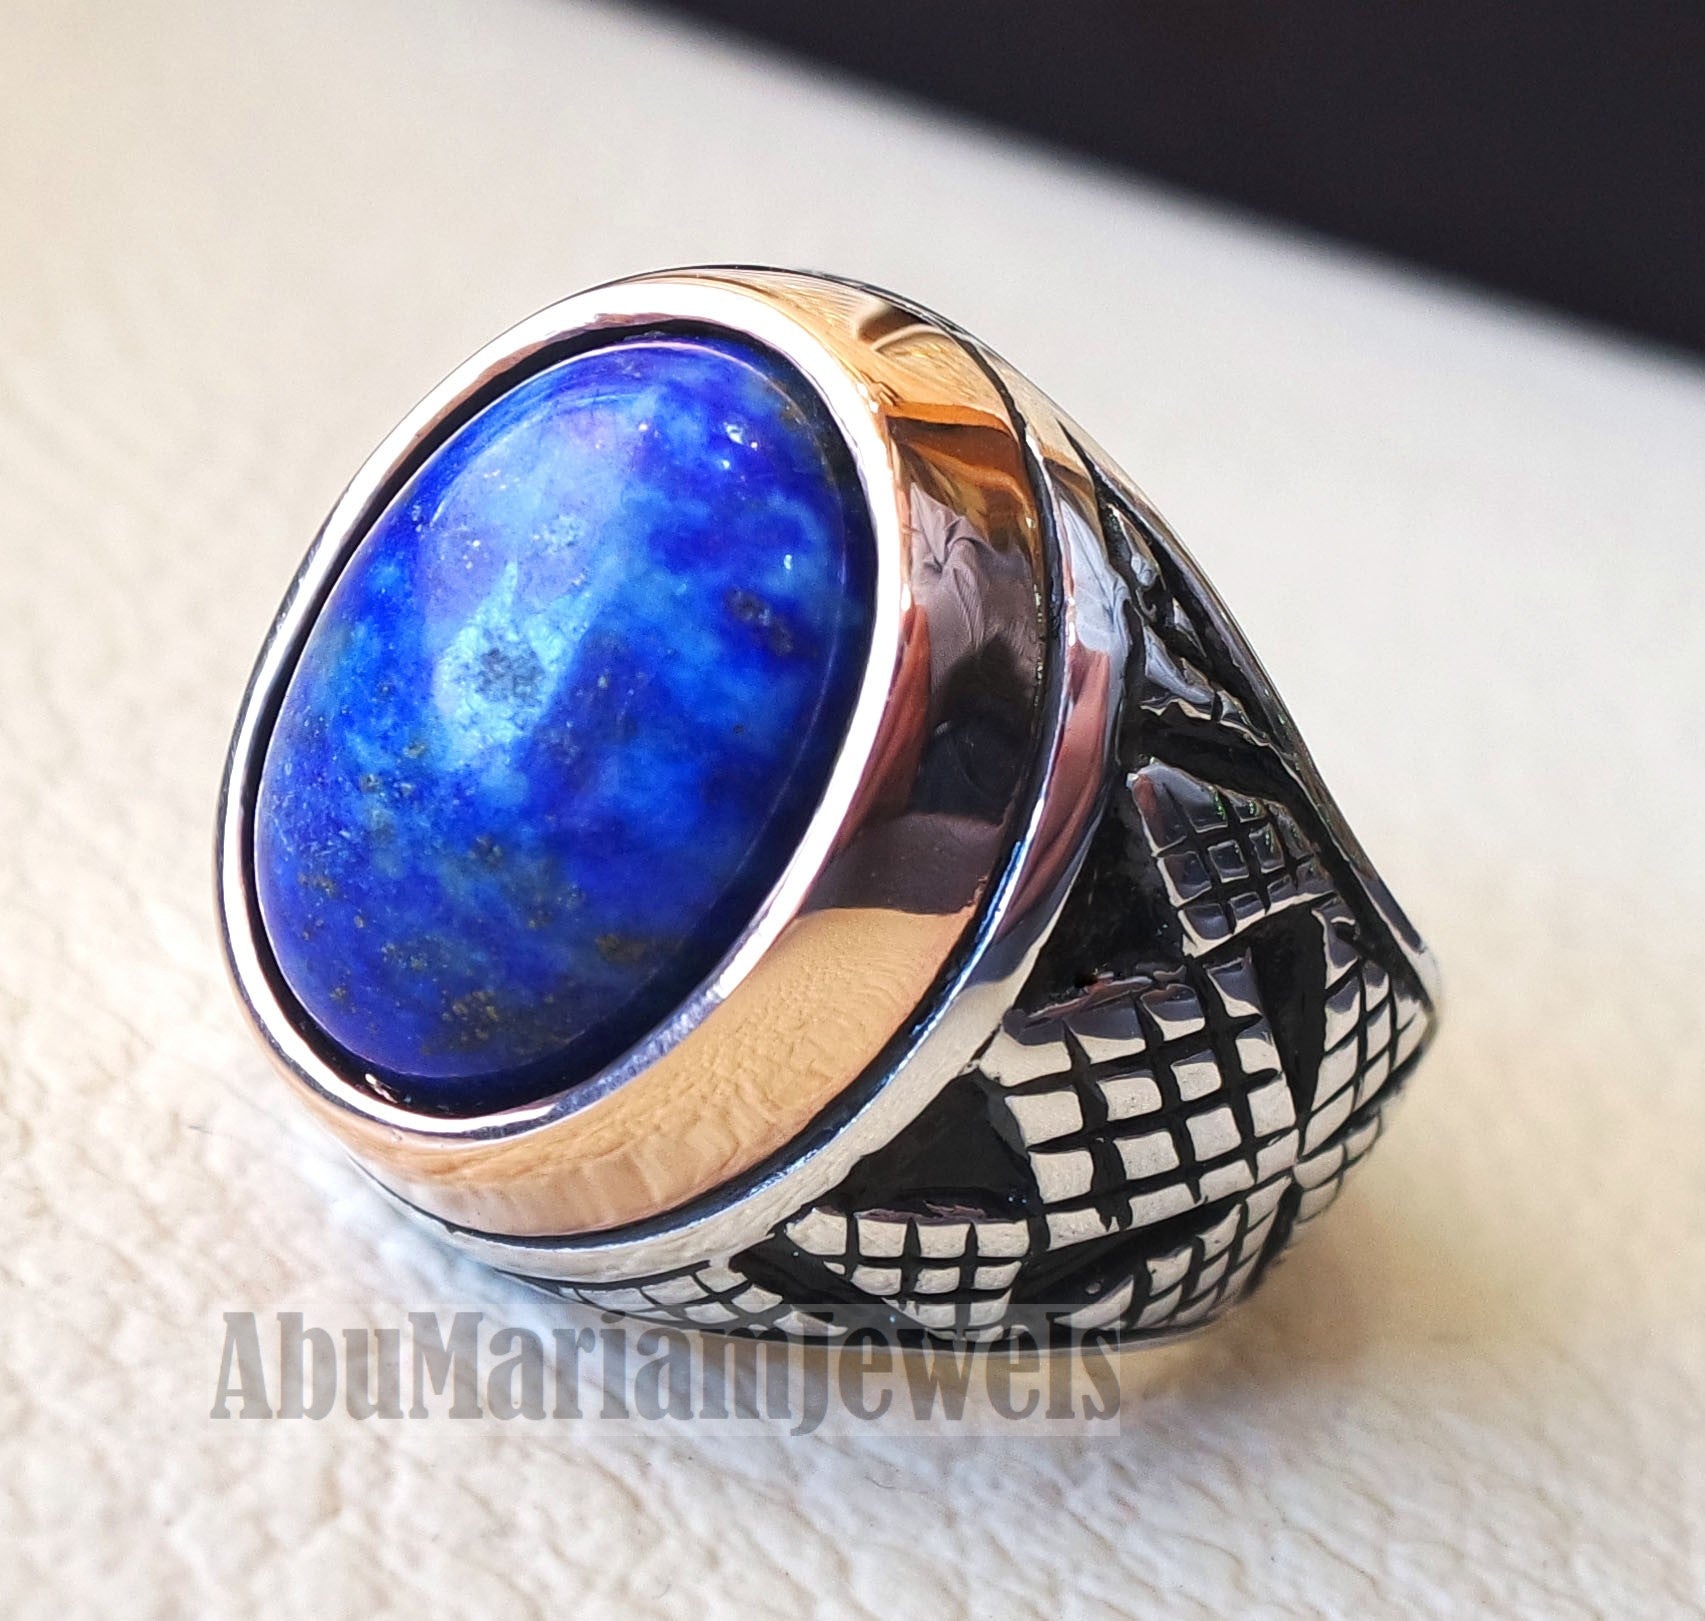 lapis lazuli oval cabochon natural blue stone ring bronze and sterling silver 925 men jewelry all sizes 16 * 12 mm ottoman middle eastern